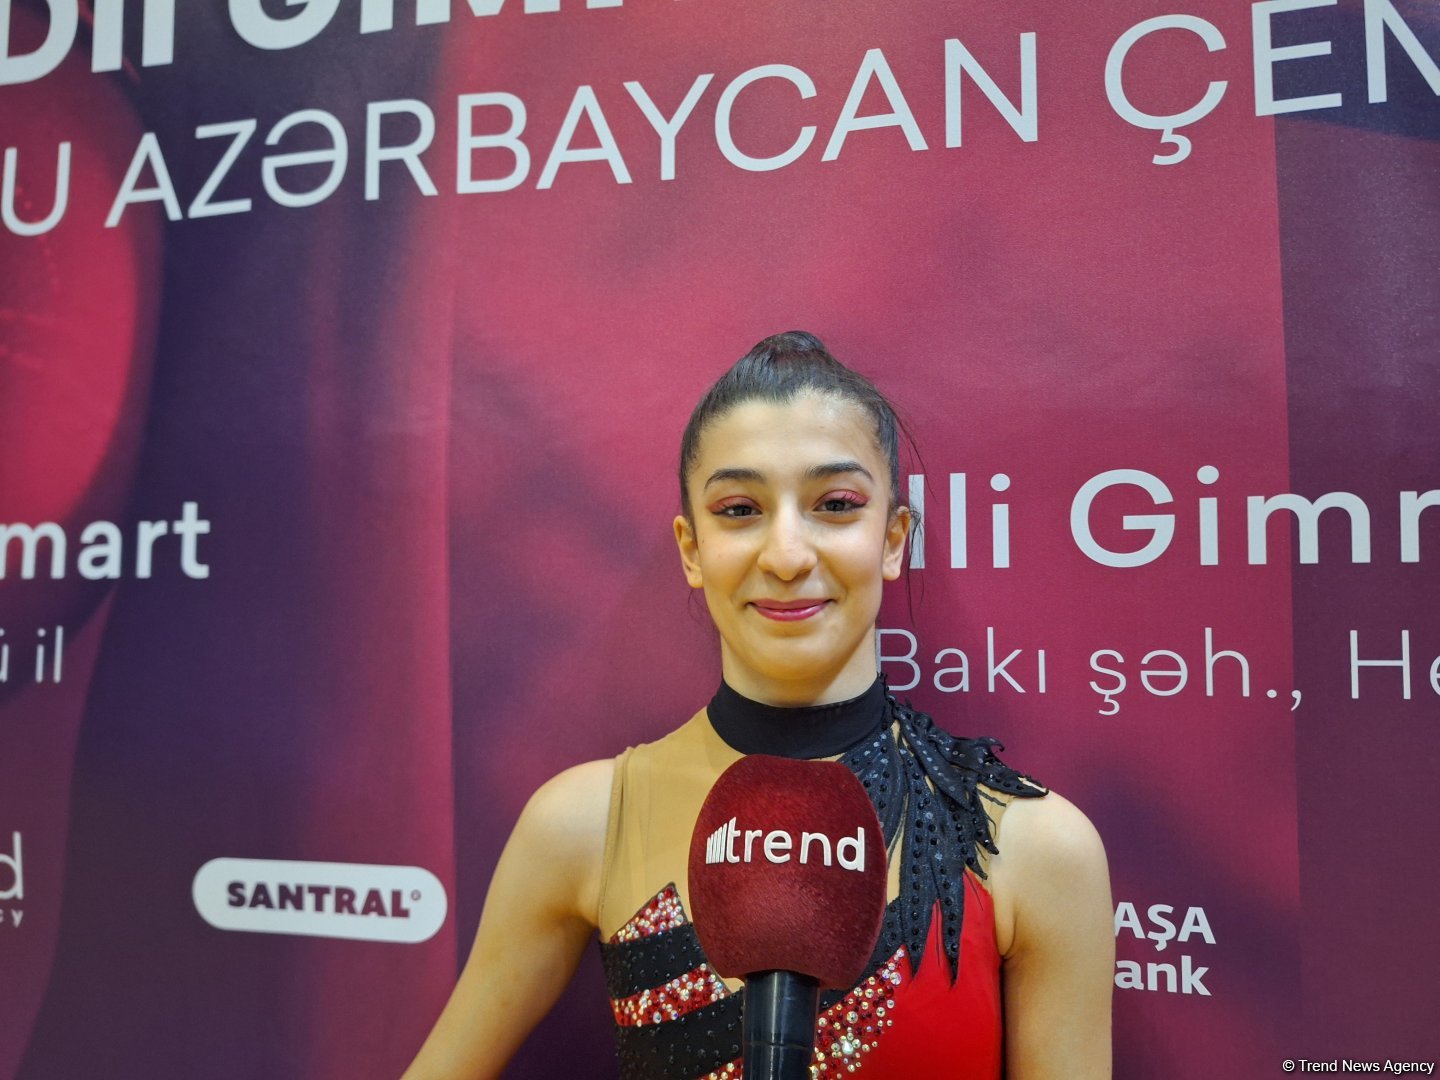 Participation in Azerbaijan Championship to boost confidence in next competitions - young gymnast